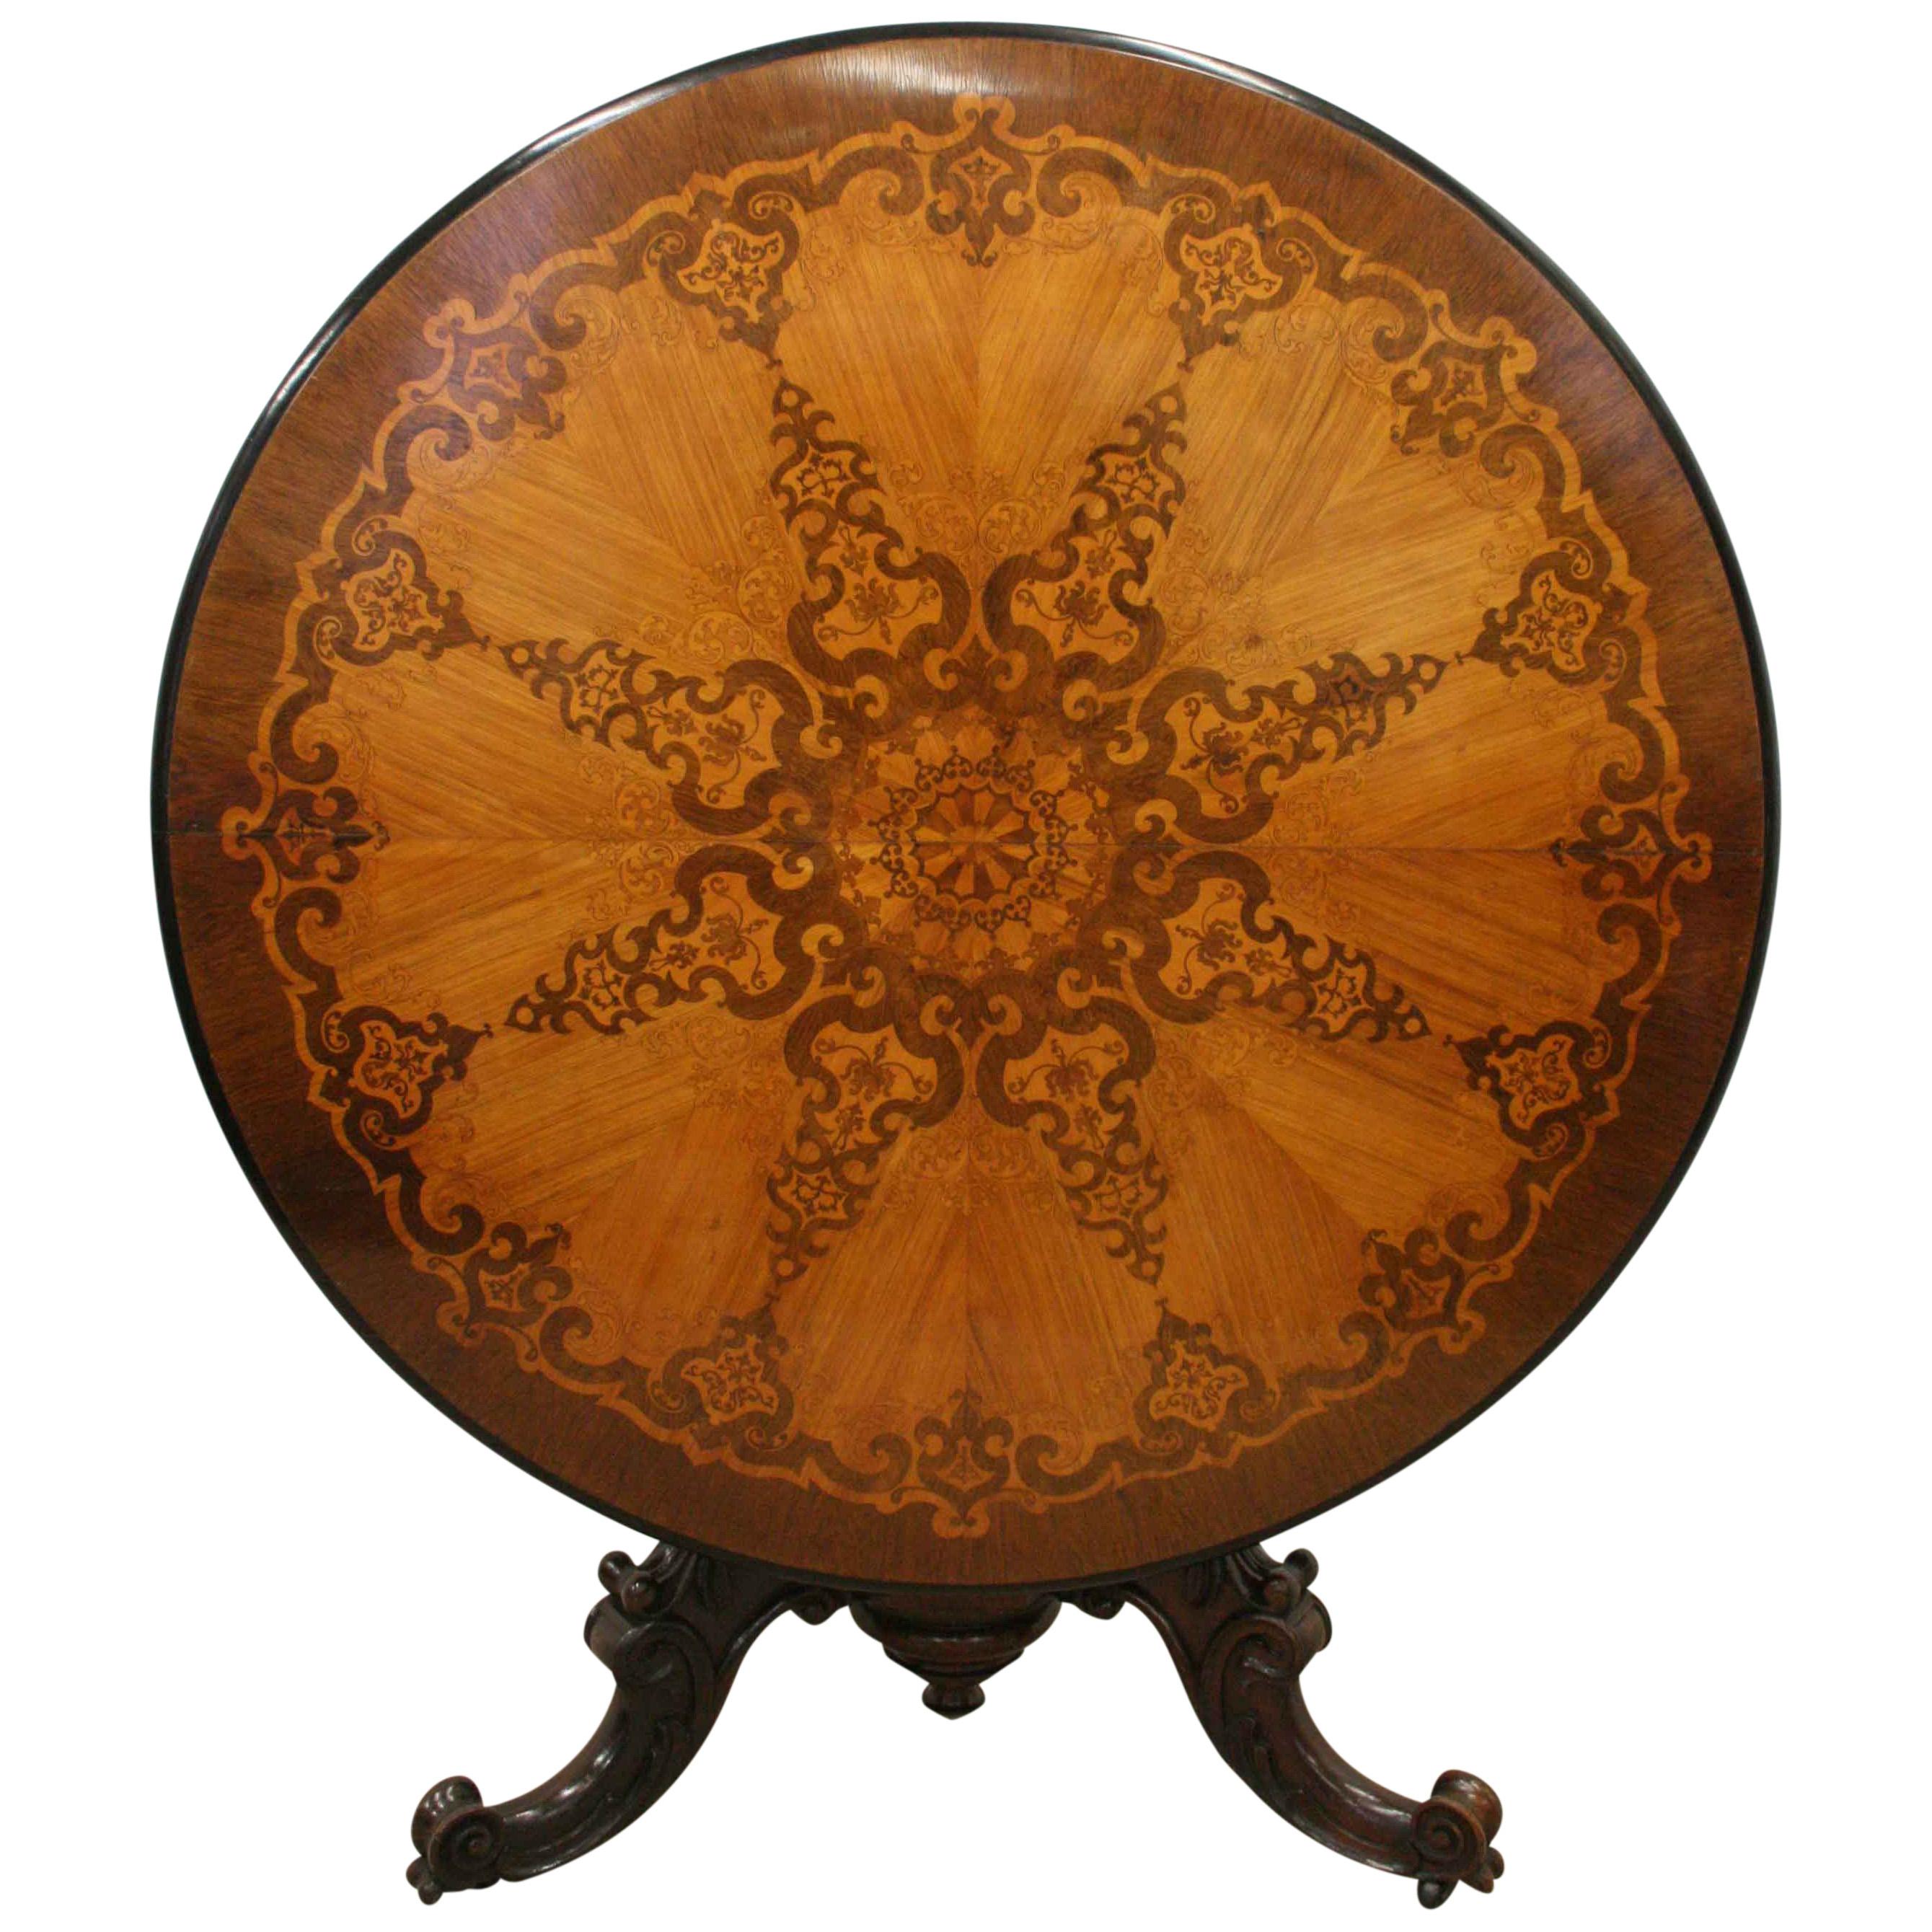 An exhibition quality Victorian rosewood, walnut and kingwood marquetry inlaid circular breakfast table, circa 1860. The table has a moulded and ebonised fore-edge and has been made with segments of various veneers. These veneers taper down towards